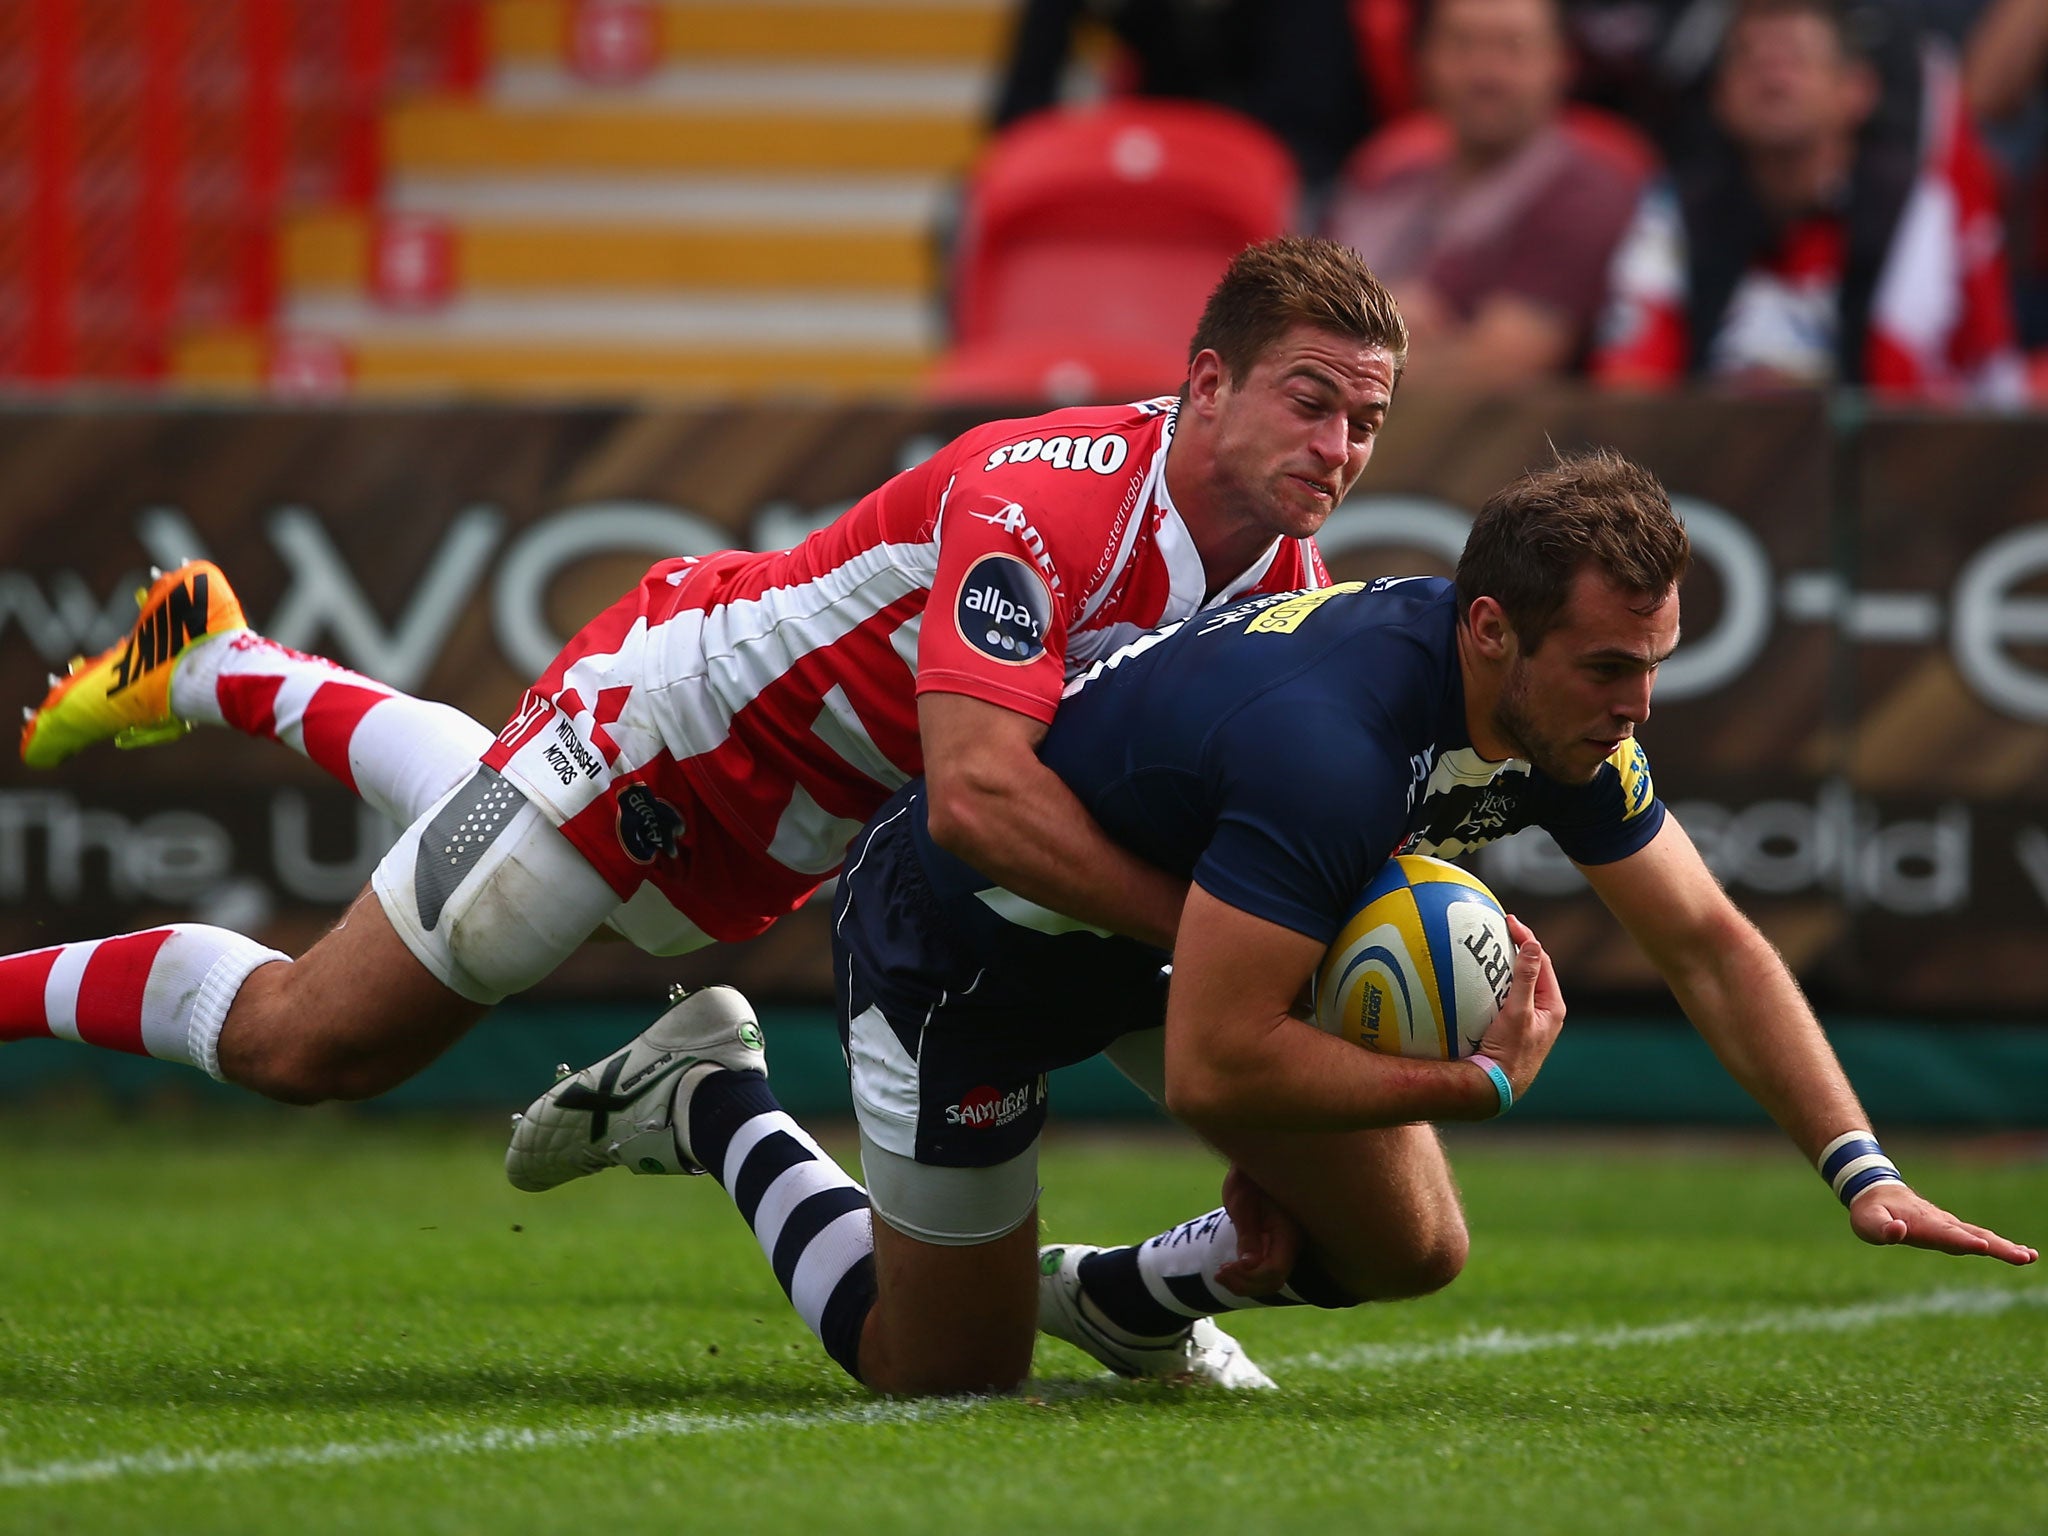 Andy Forsyth crosses for Sale to help them to a win at Gloucester